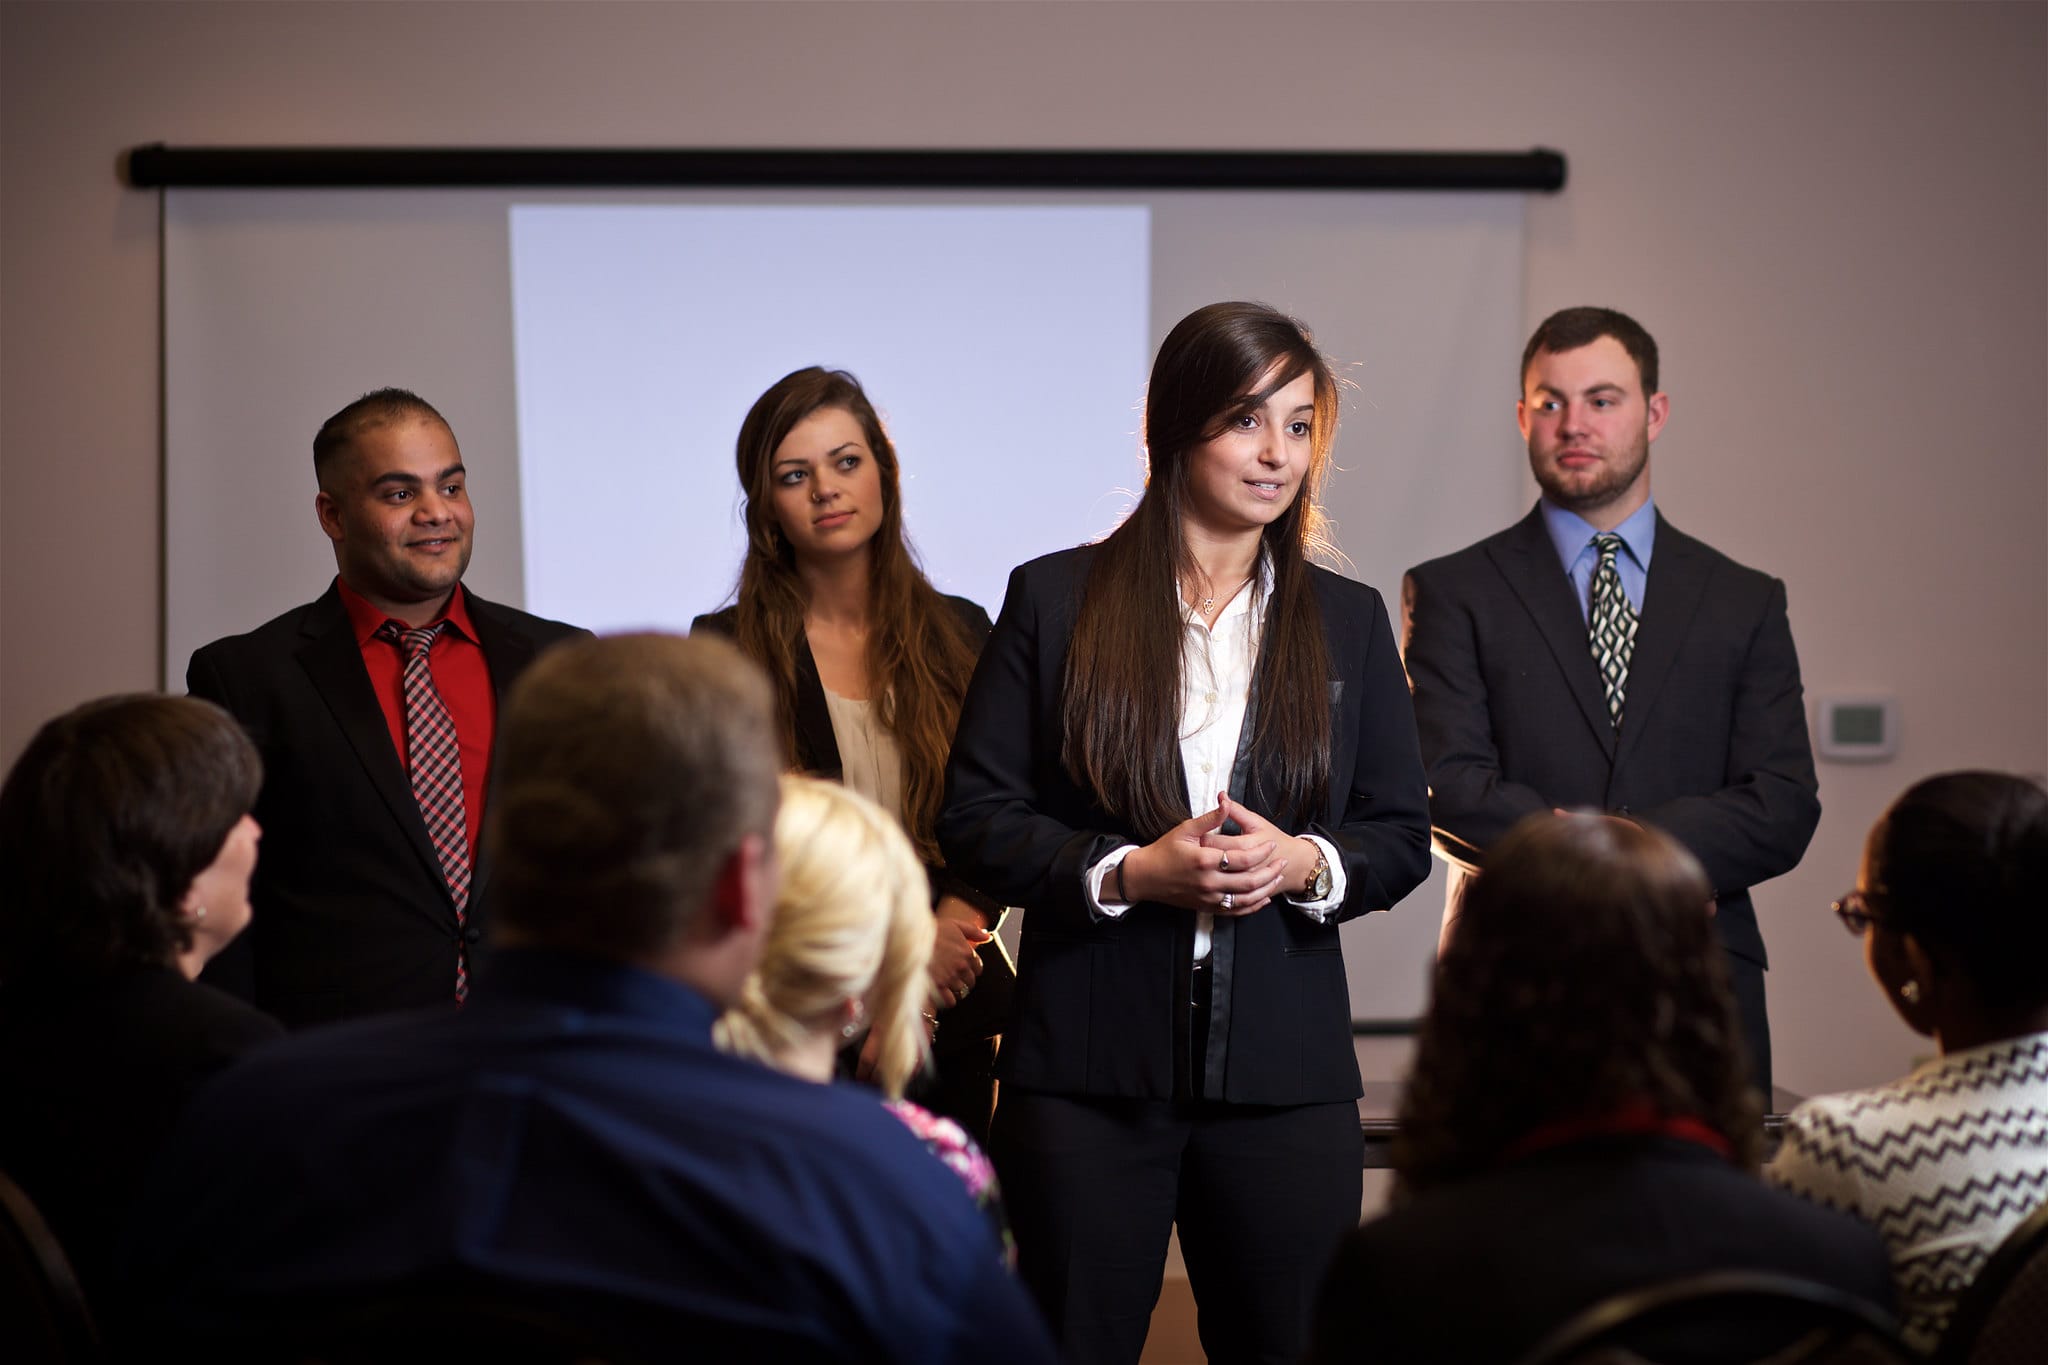 A woman is standing addressing a group of people while three others stand behind her.